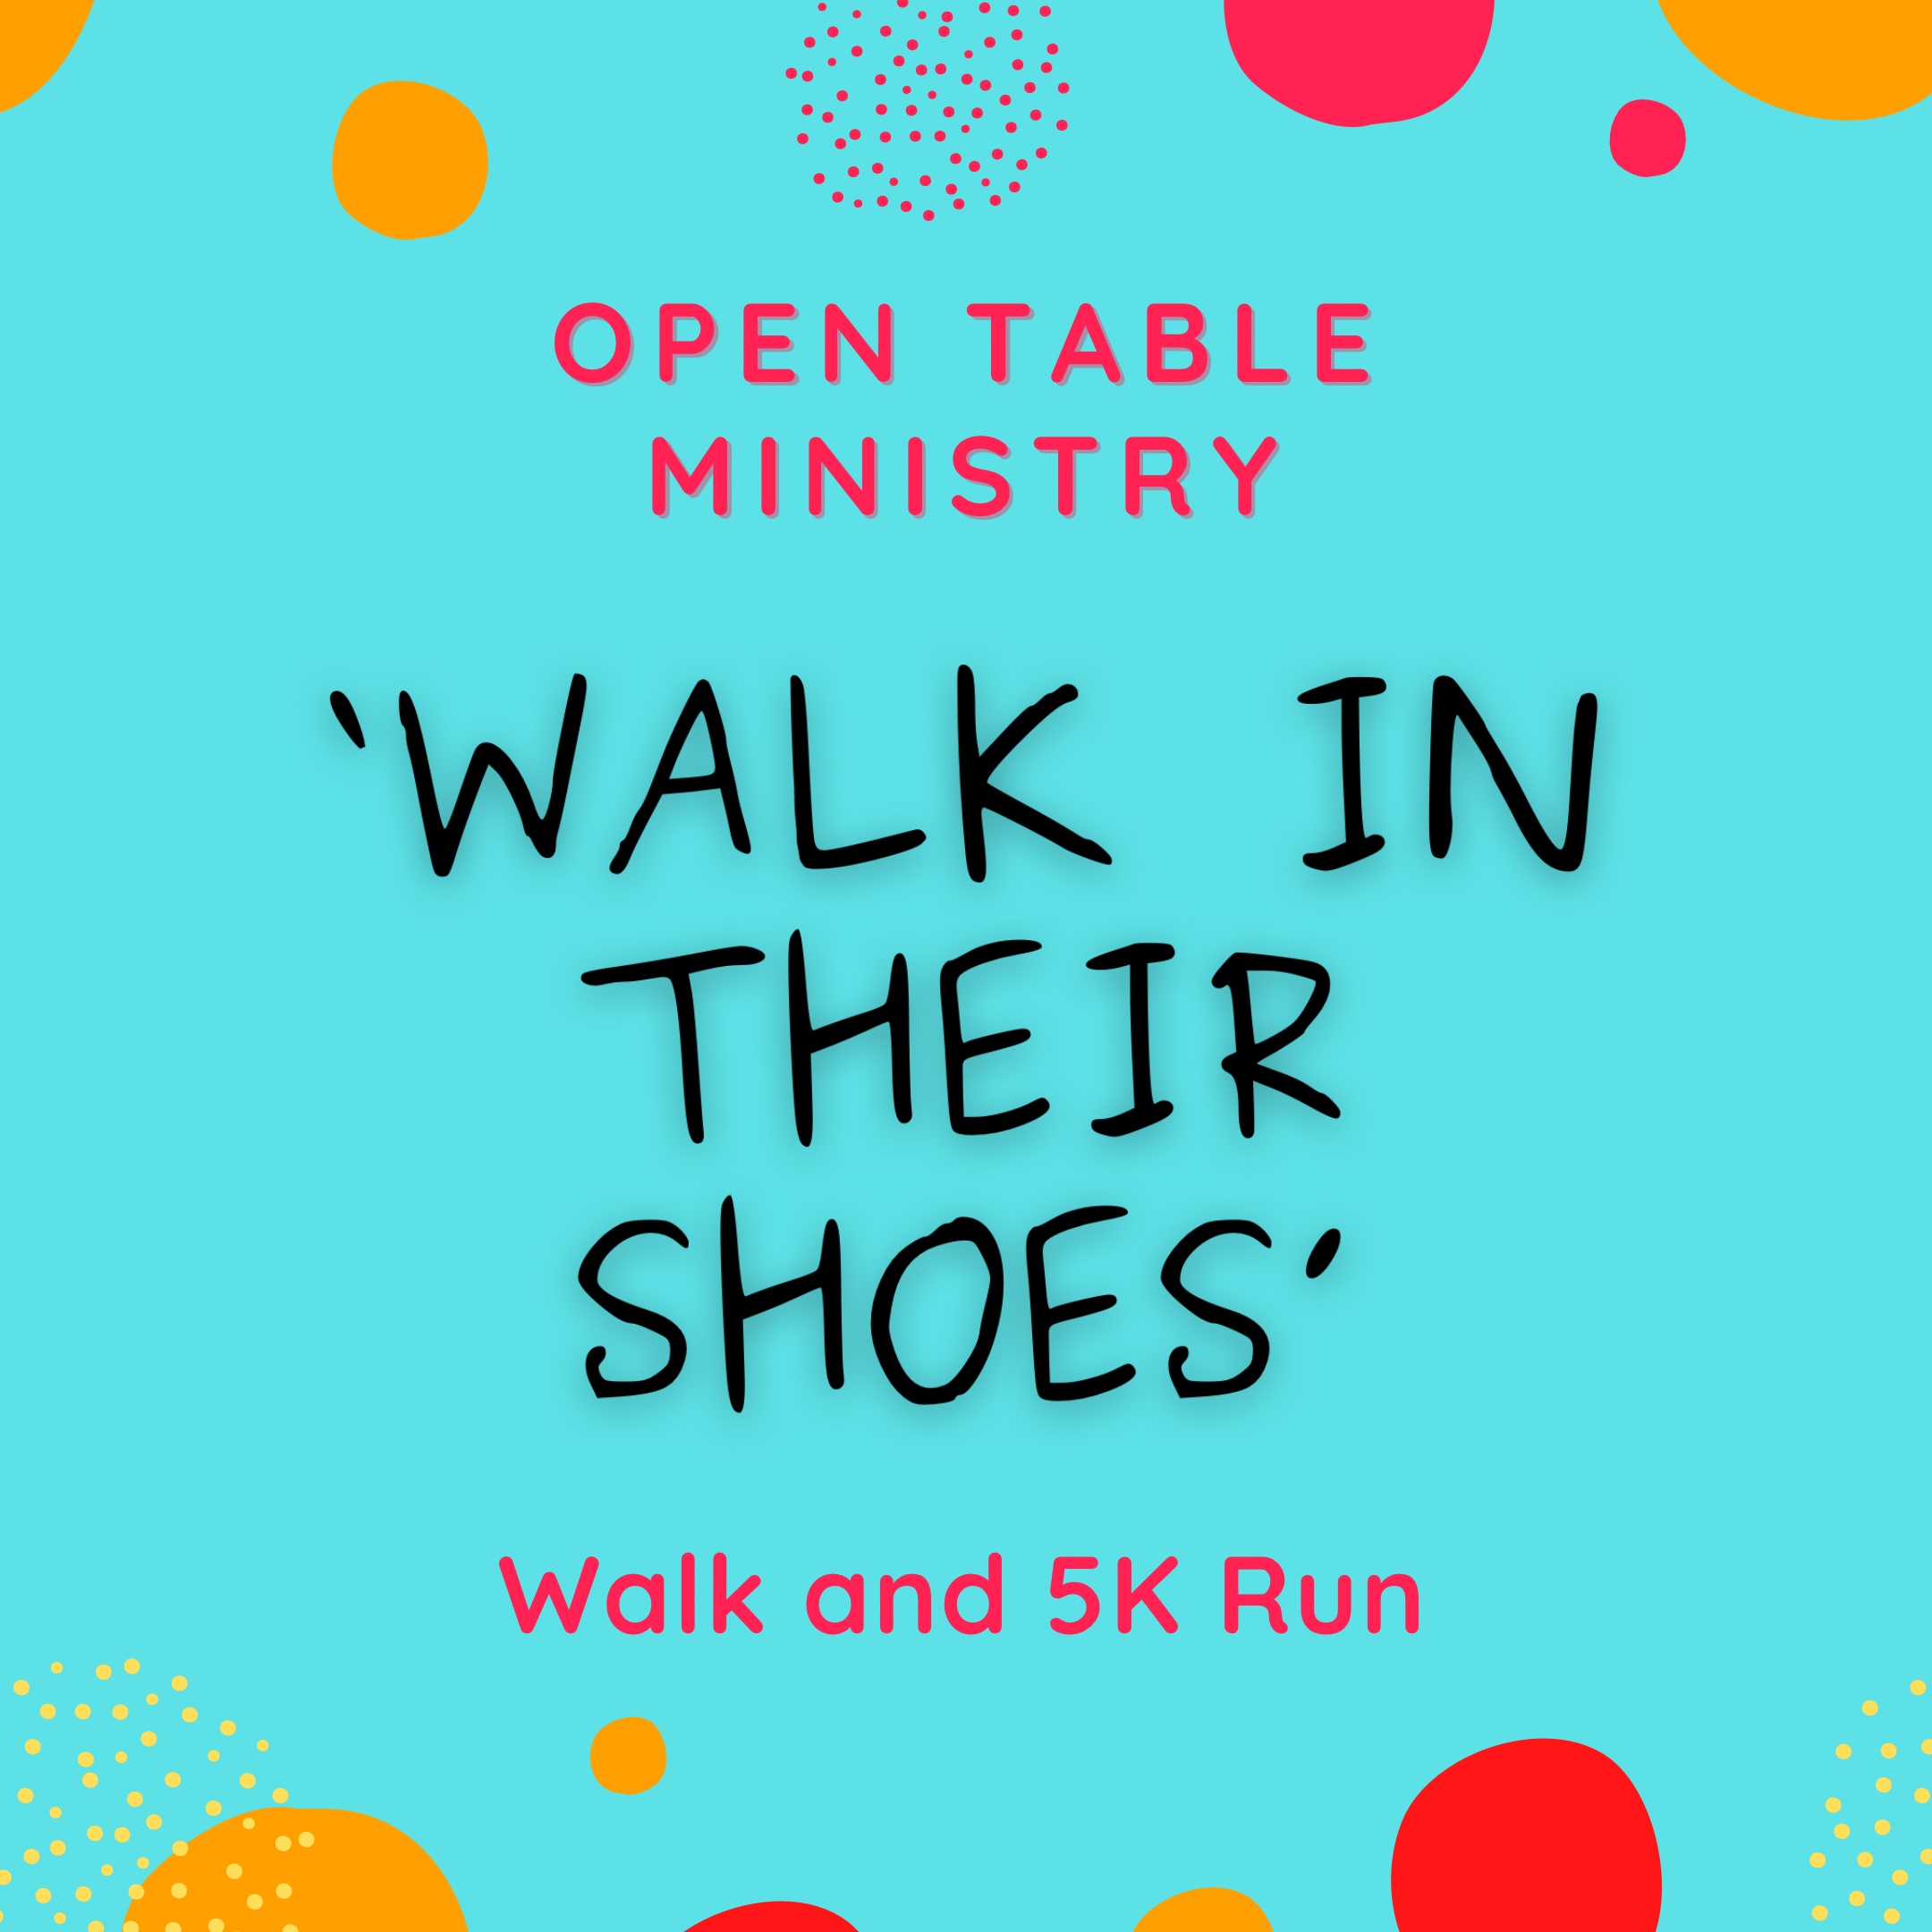 Open Table Ministry's Walk in Their Shoes 1-Mile Walk and 5k Run